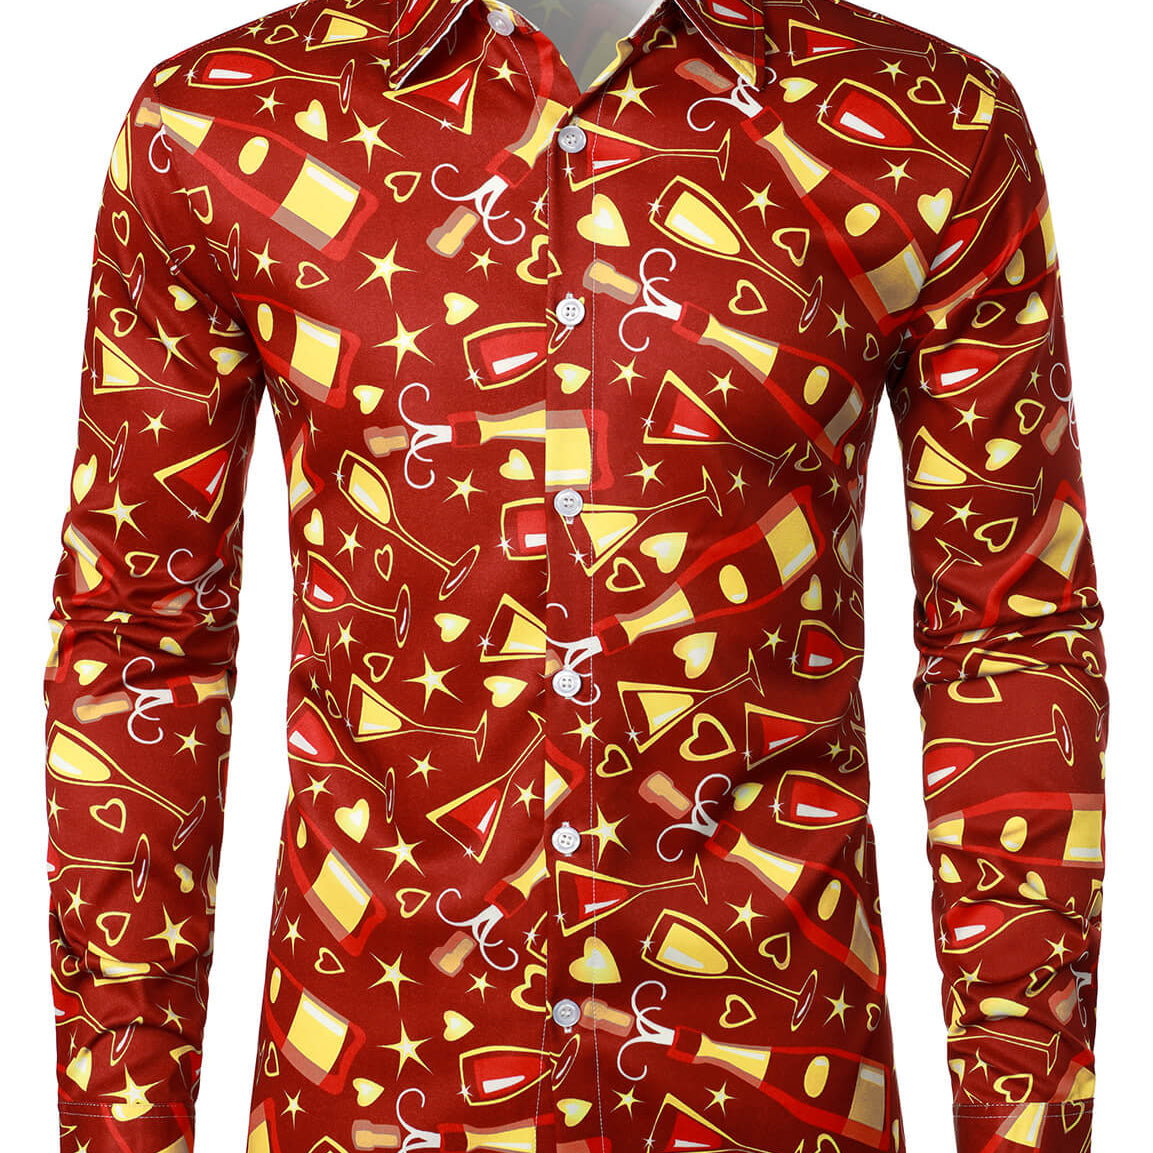 Men's Party Funny Holiday Christmas Champagne Cocktails New Year Eve Red Long Sleeve Shirt